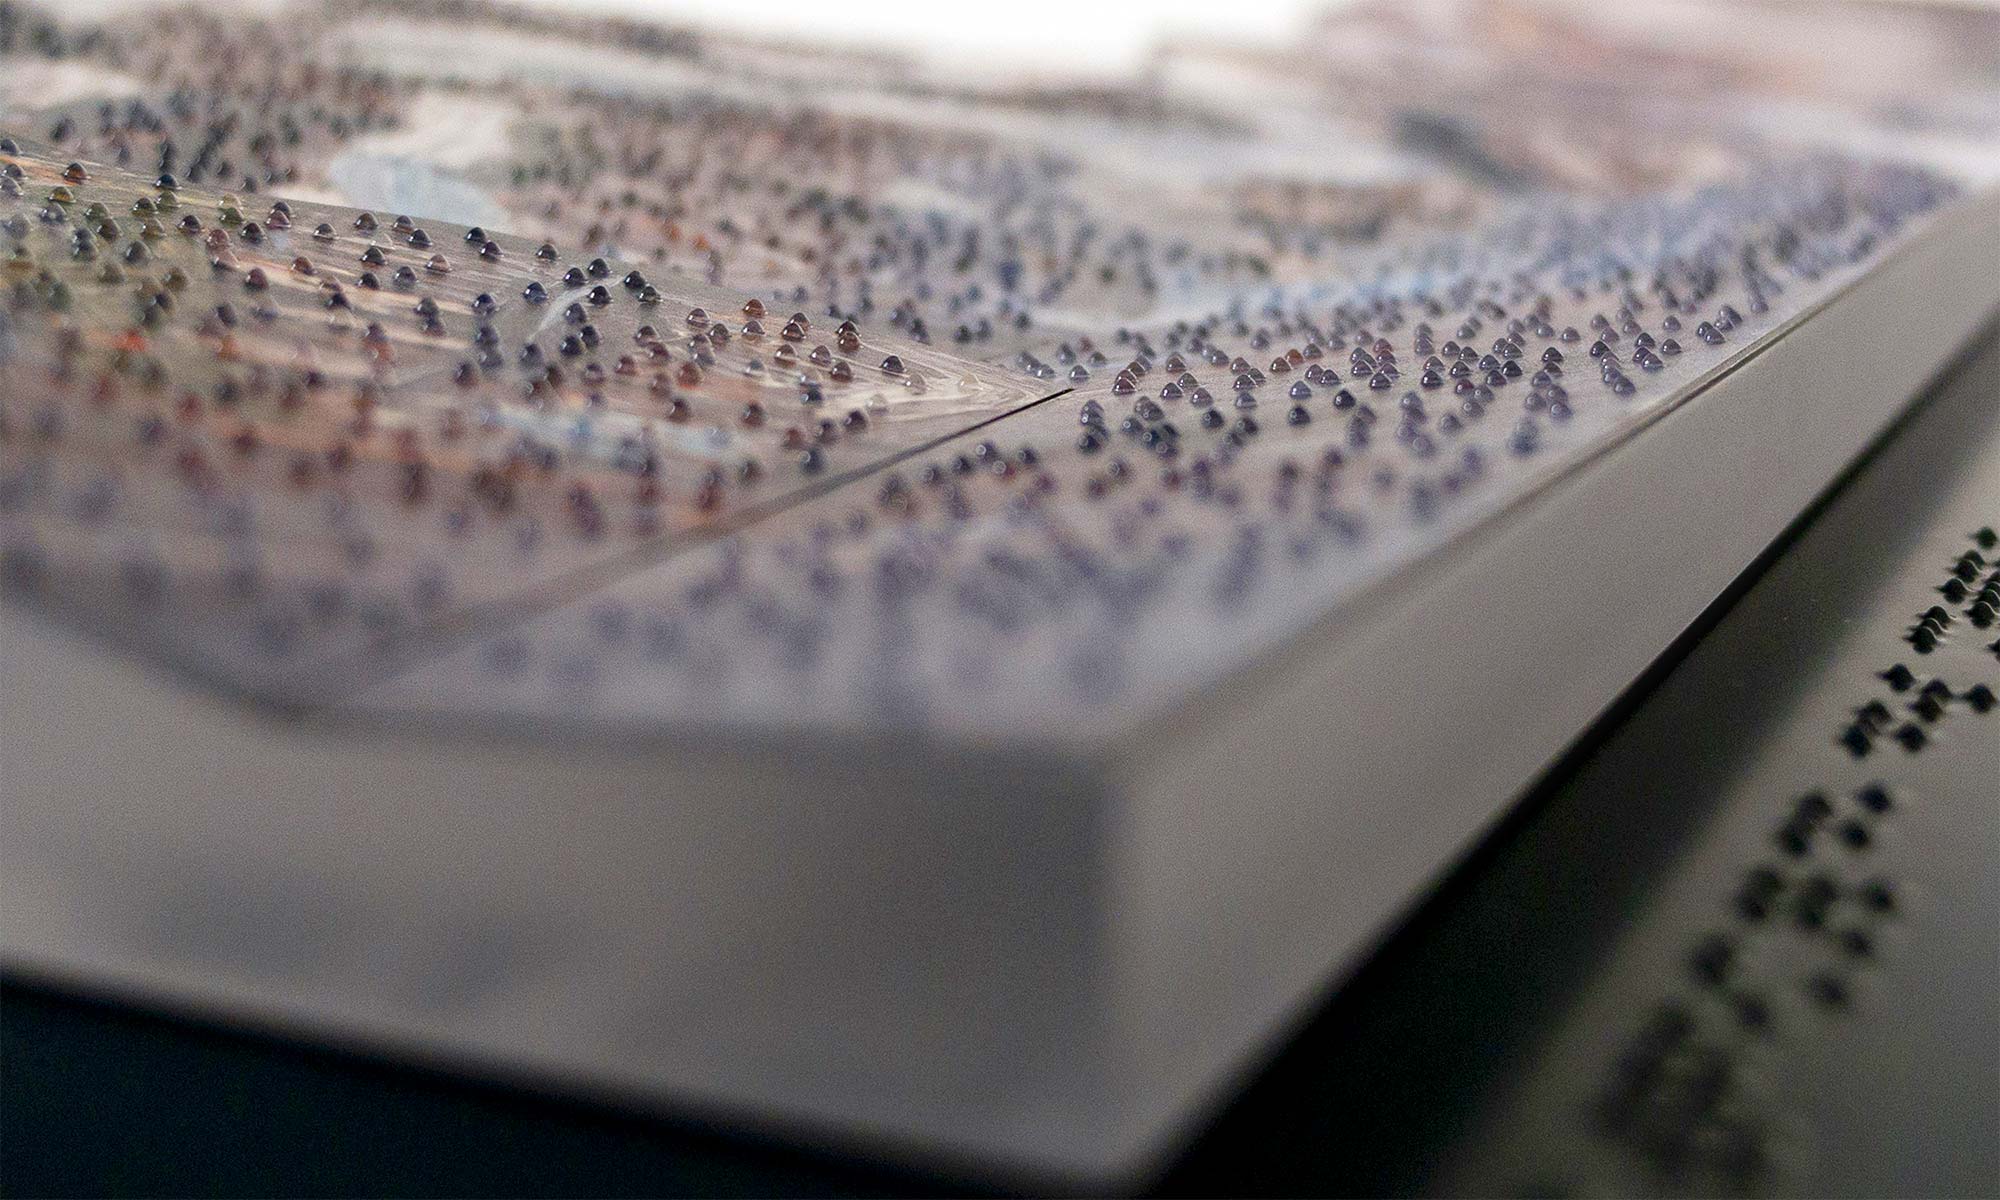 Detailed image of the structures of the tactile model "Bergwelten".